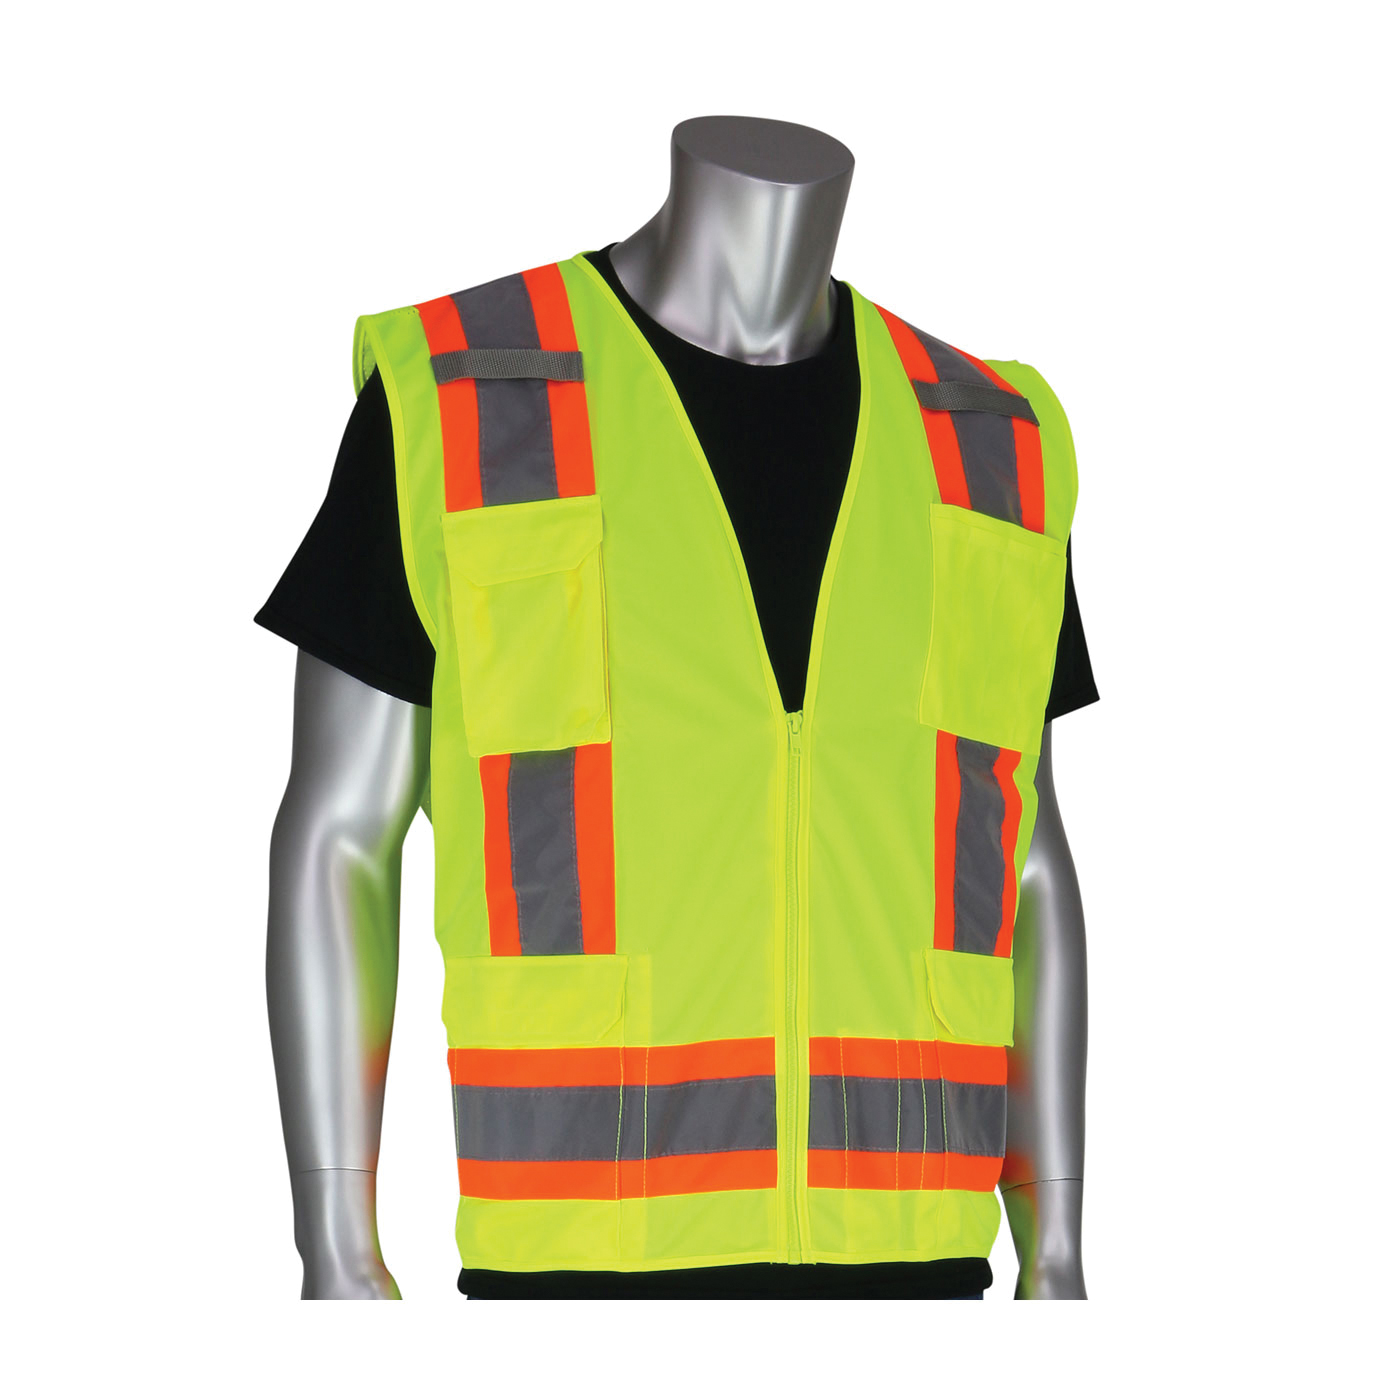 PIP® 302-0500-YEL/S 2-Tone Surveyor Safety Vest, S, Hi-Viz Lime Yellow, Polyester/Solid Tricot, Zipper Closure, 11 Pockets, ANSI Class: Class 2, Specifications Met: ANSI 107 Type R